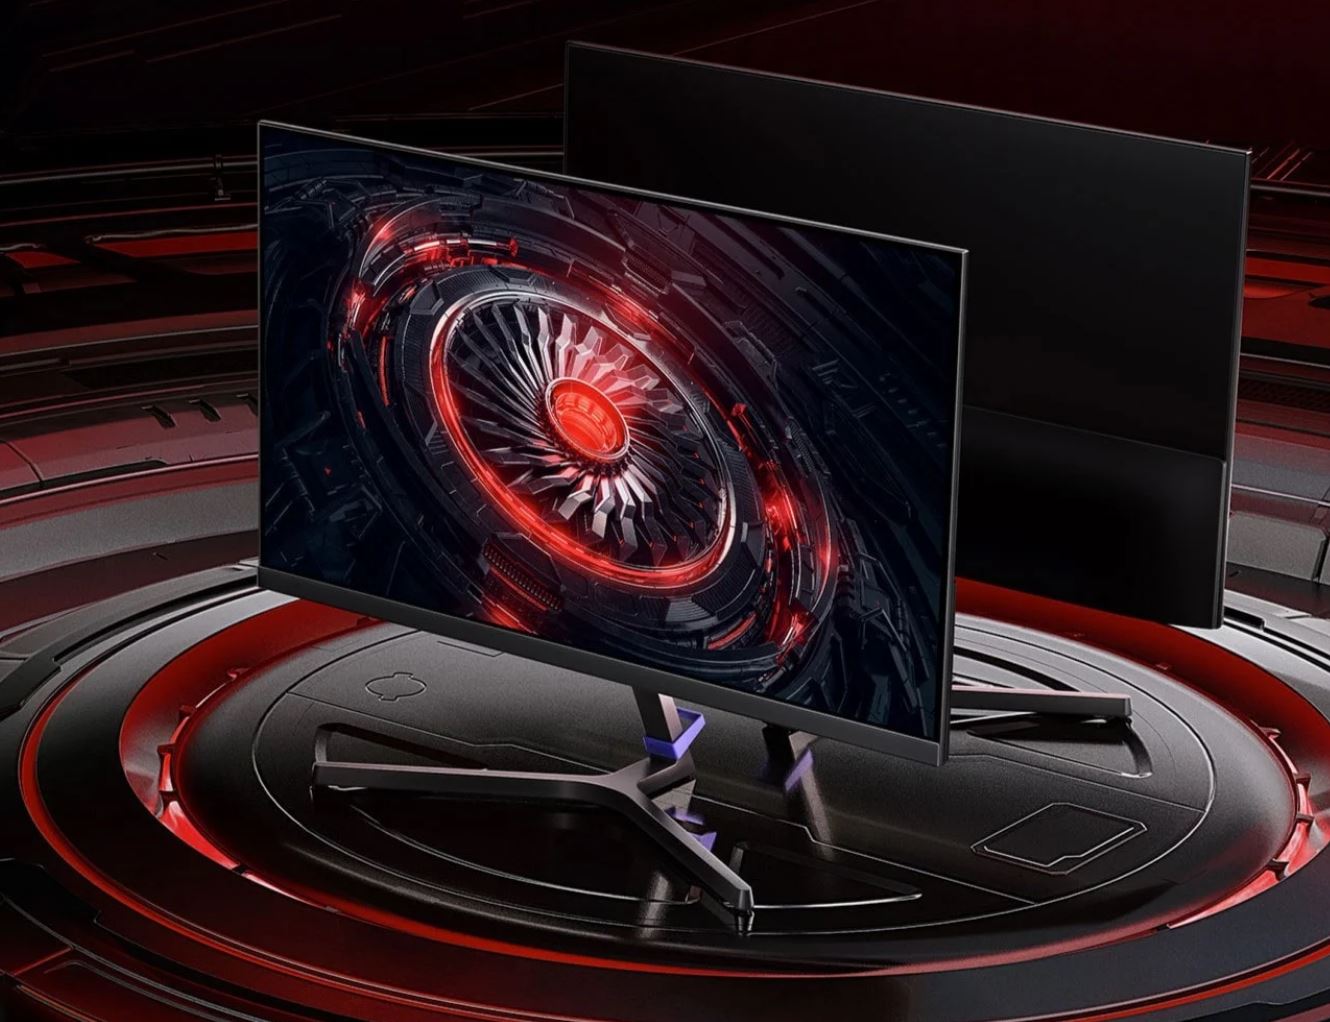 Xiaomi Redmi Gaming Monitor G24: the new true-color gaming monitor with 165Hz costs €86